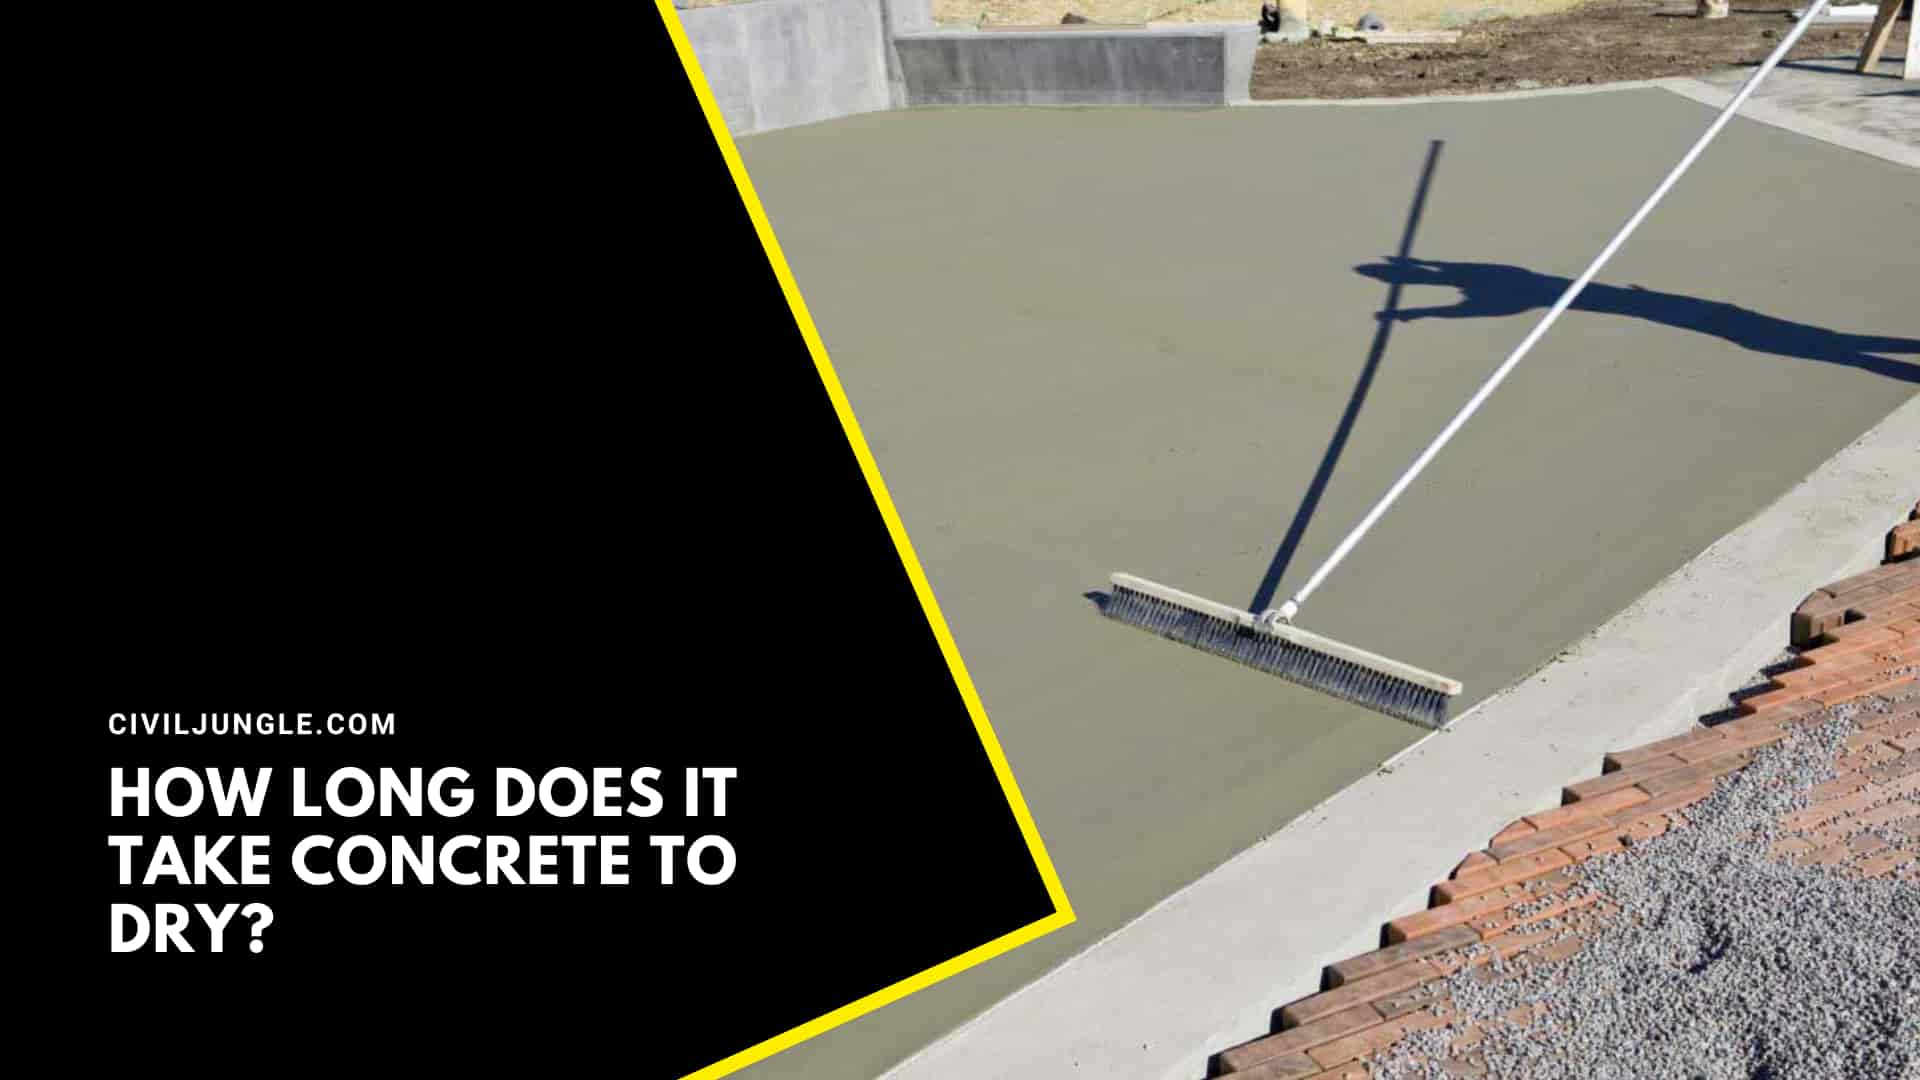 How Long Does It Take Concrete To Dry When Does Concrete Start Drying